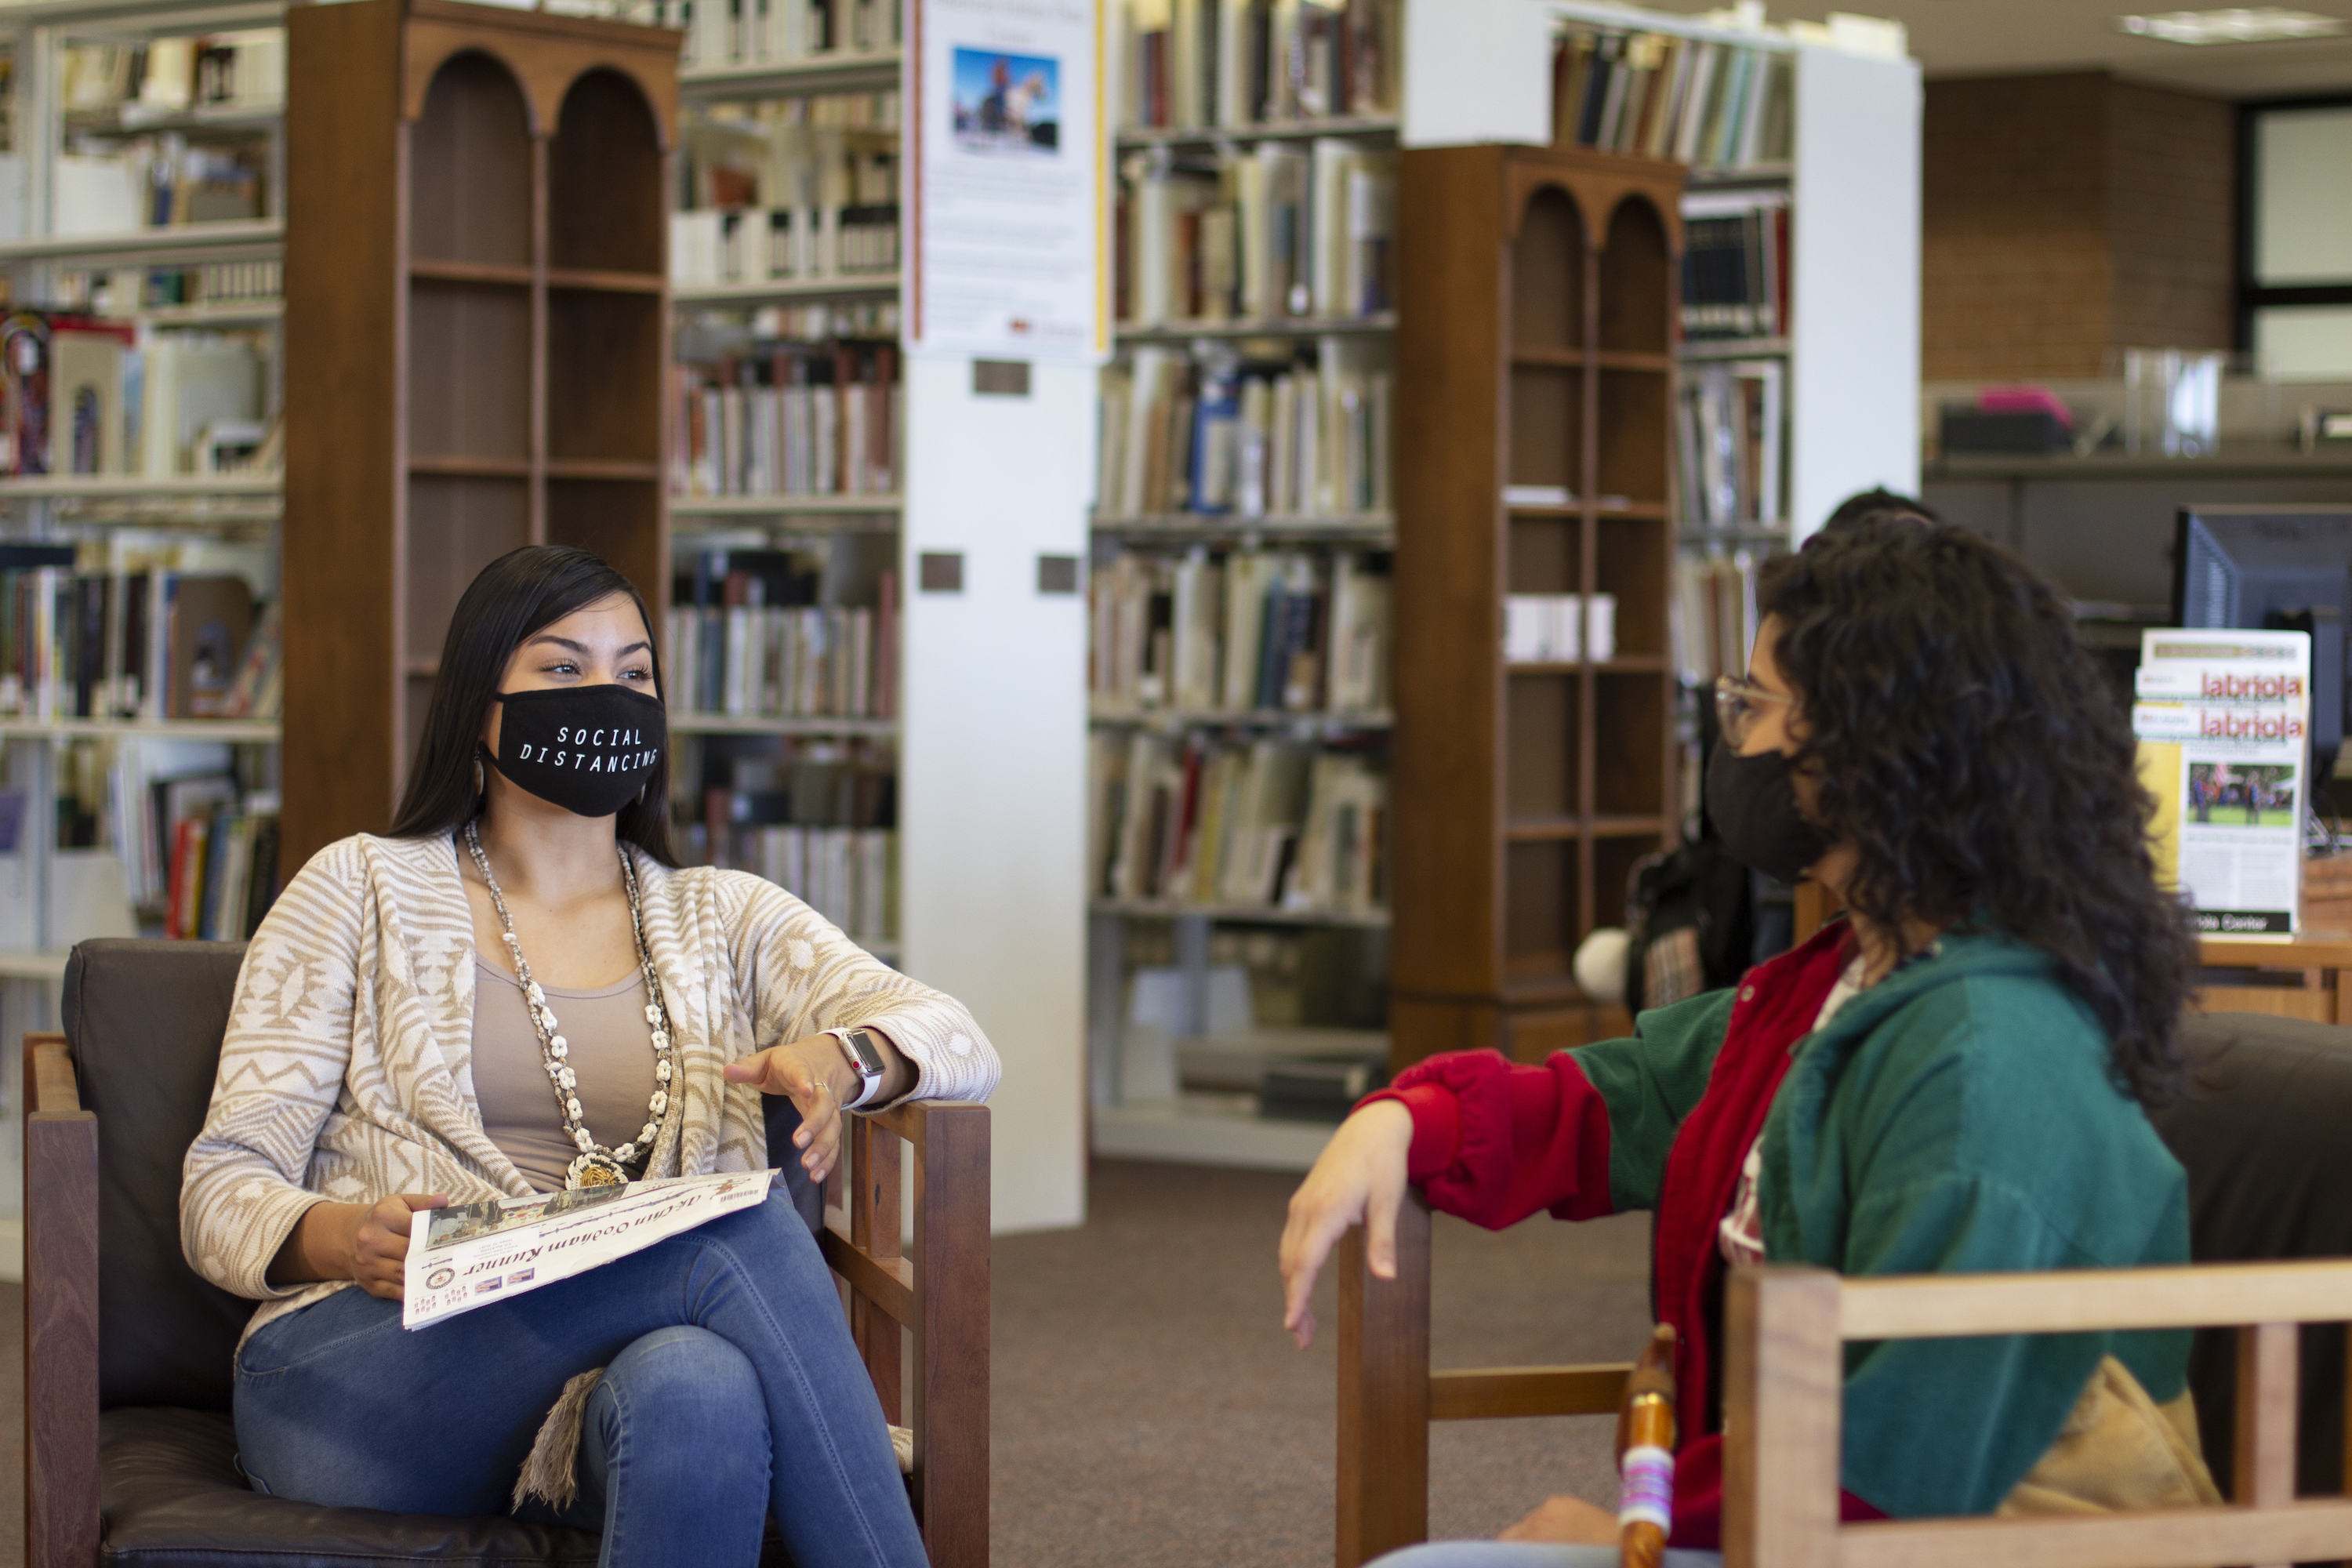 ASU students sit and talk in the Labriola Center